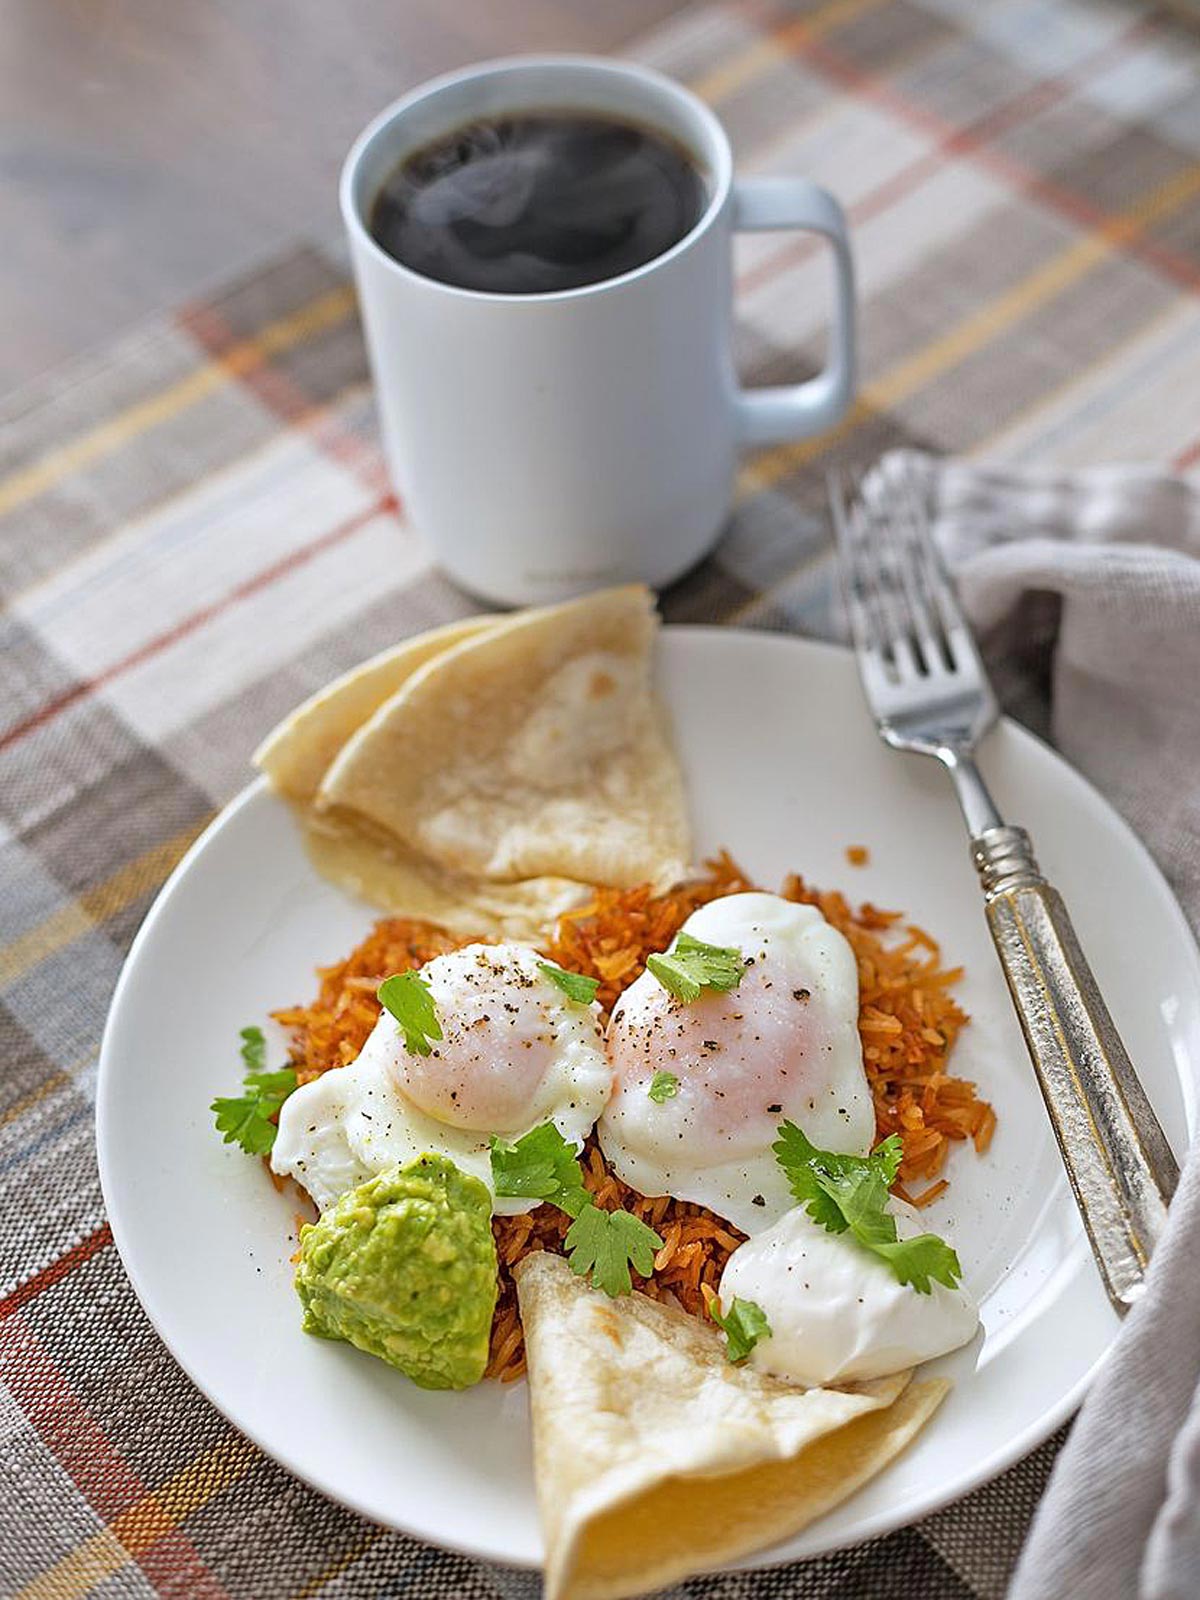 Cup of coffee with plate of Mexican Rice and poached eggs.